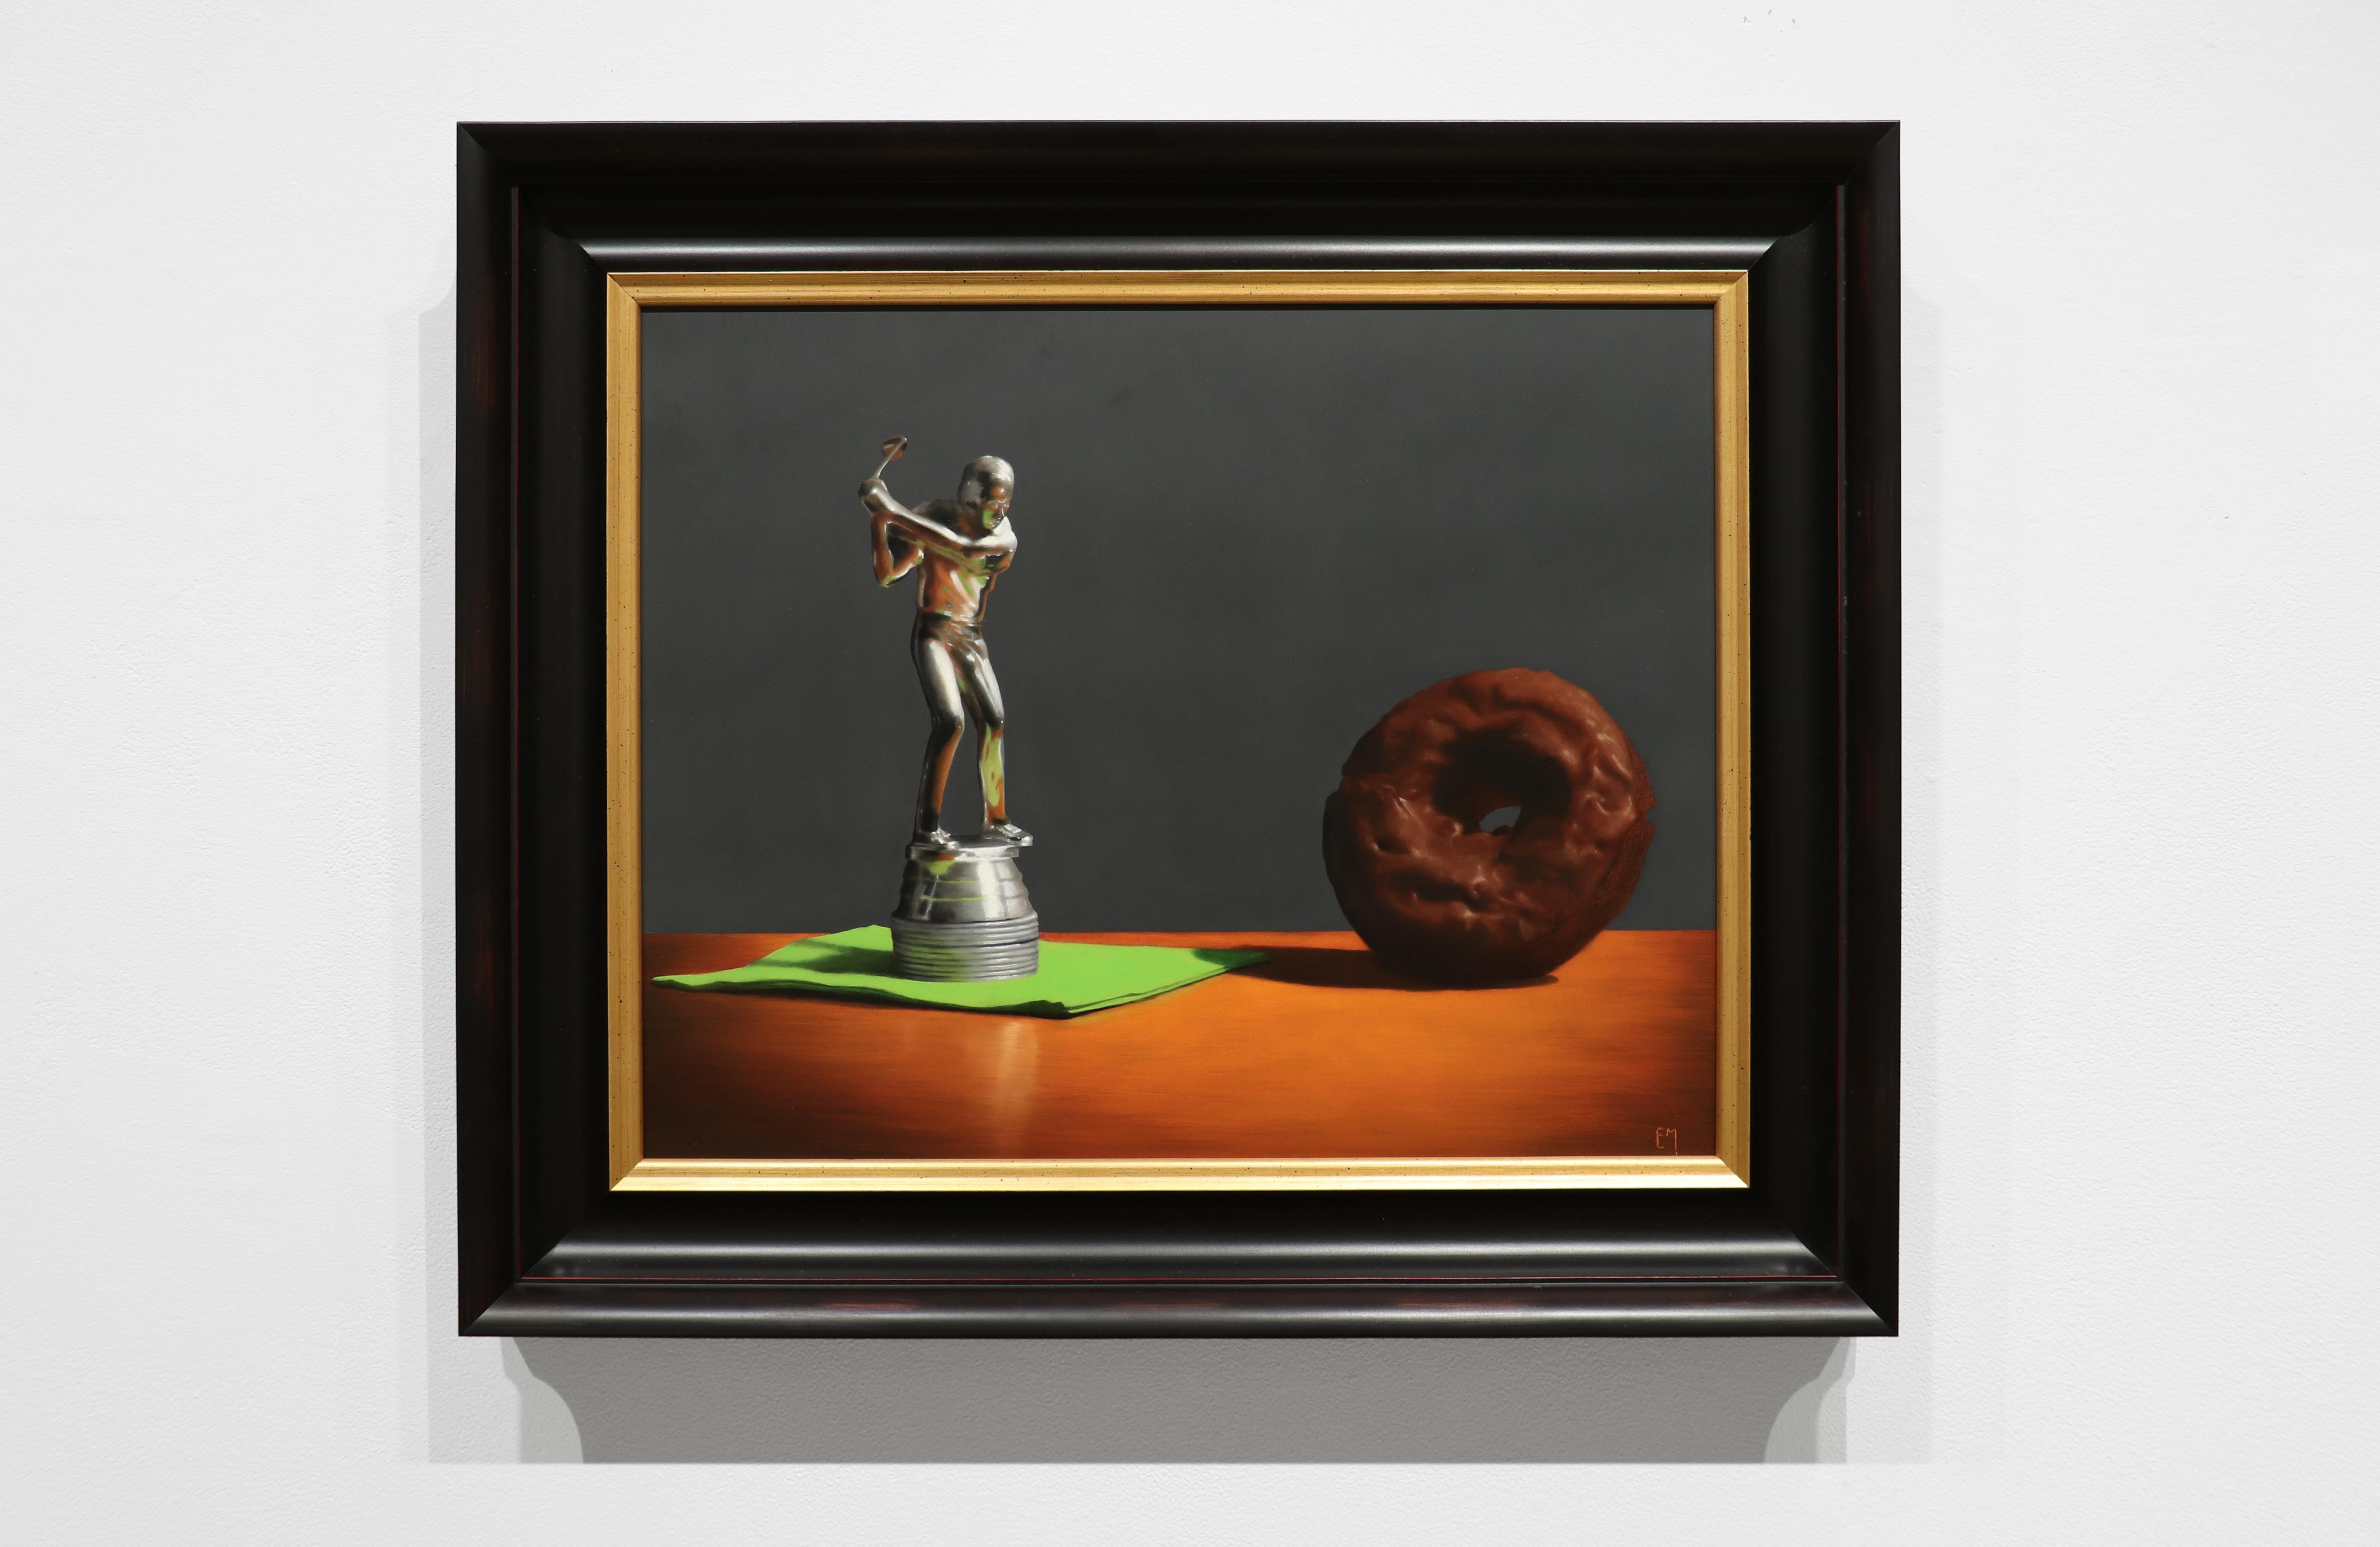 A HOLE IN ONE II - Hyperrealism / Contemporary / Doughnut / Golf Lover - Painting by Elizabeth McGhee